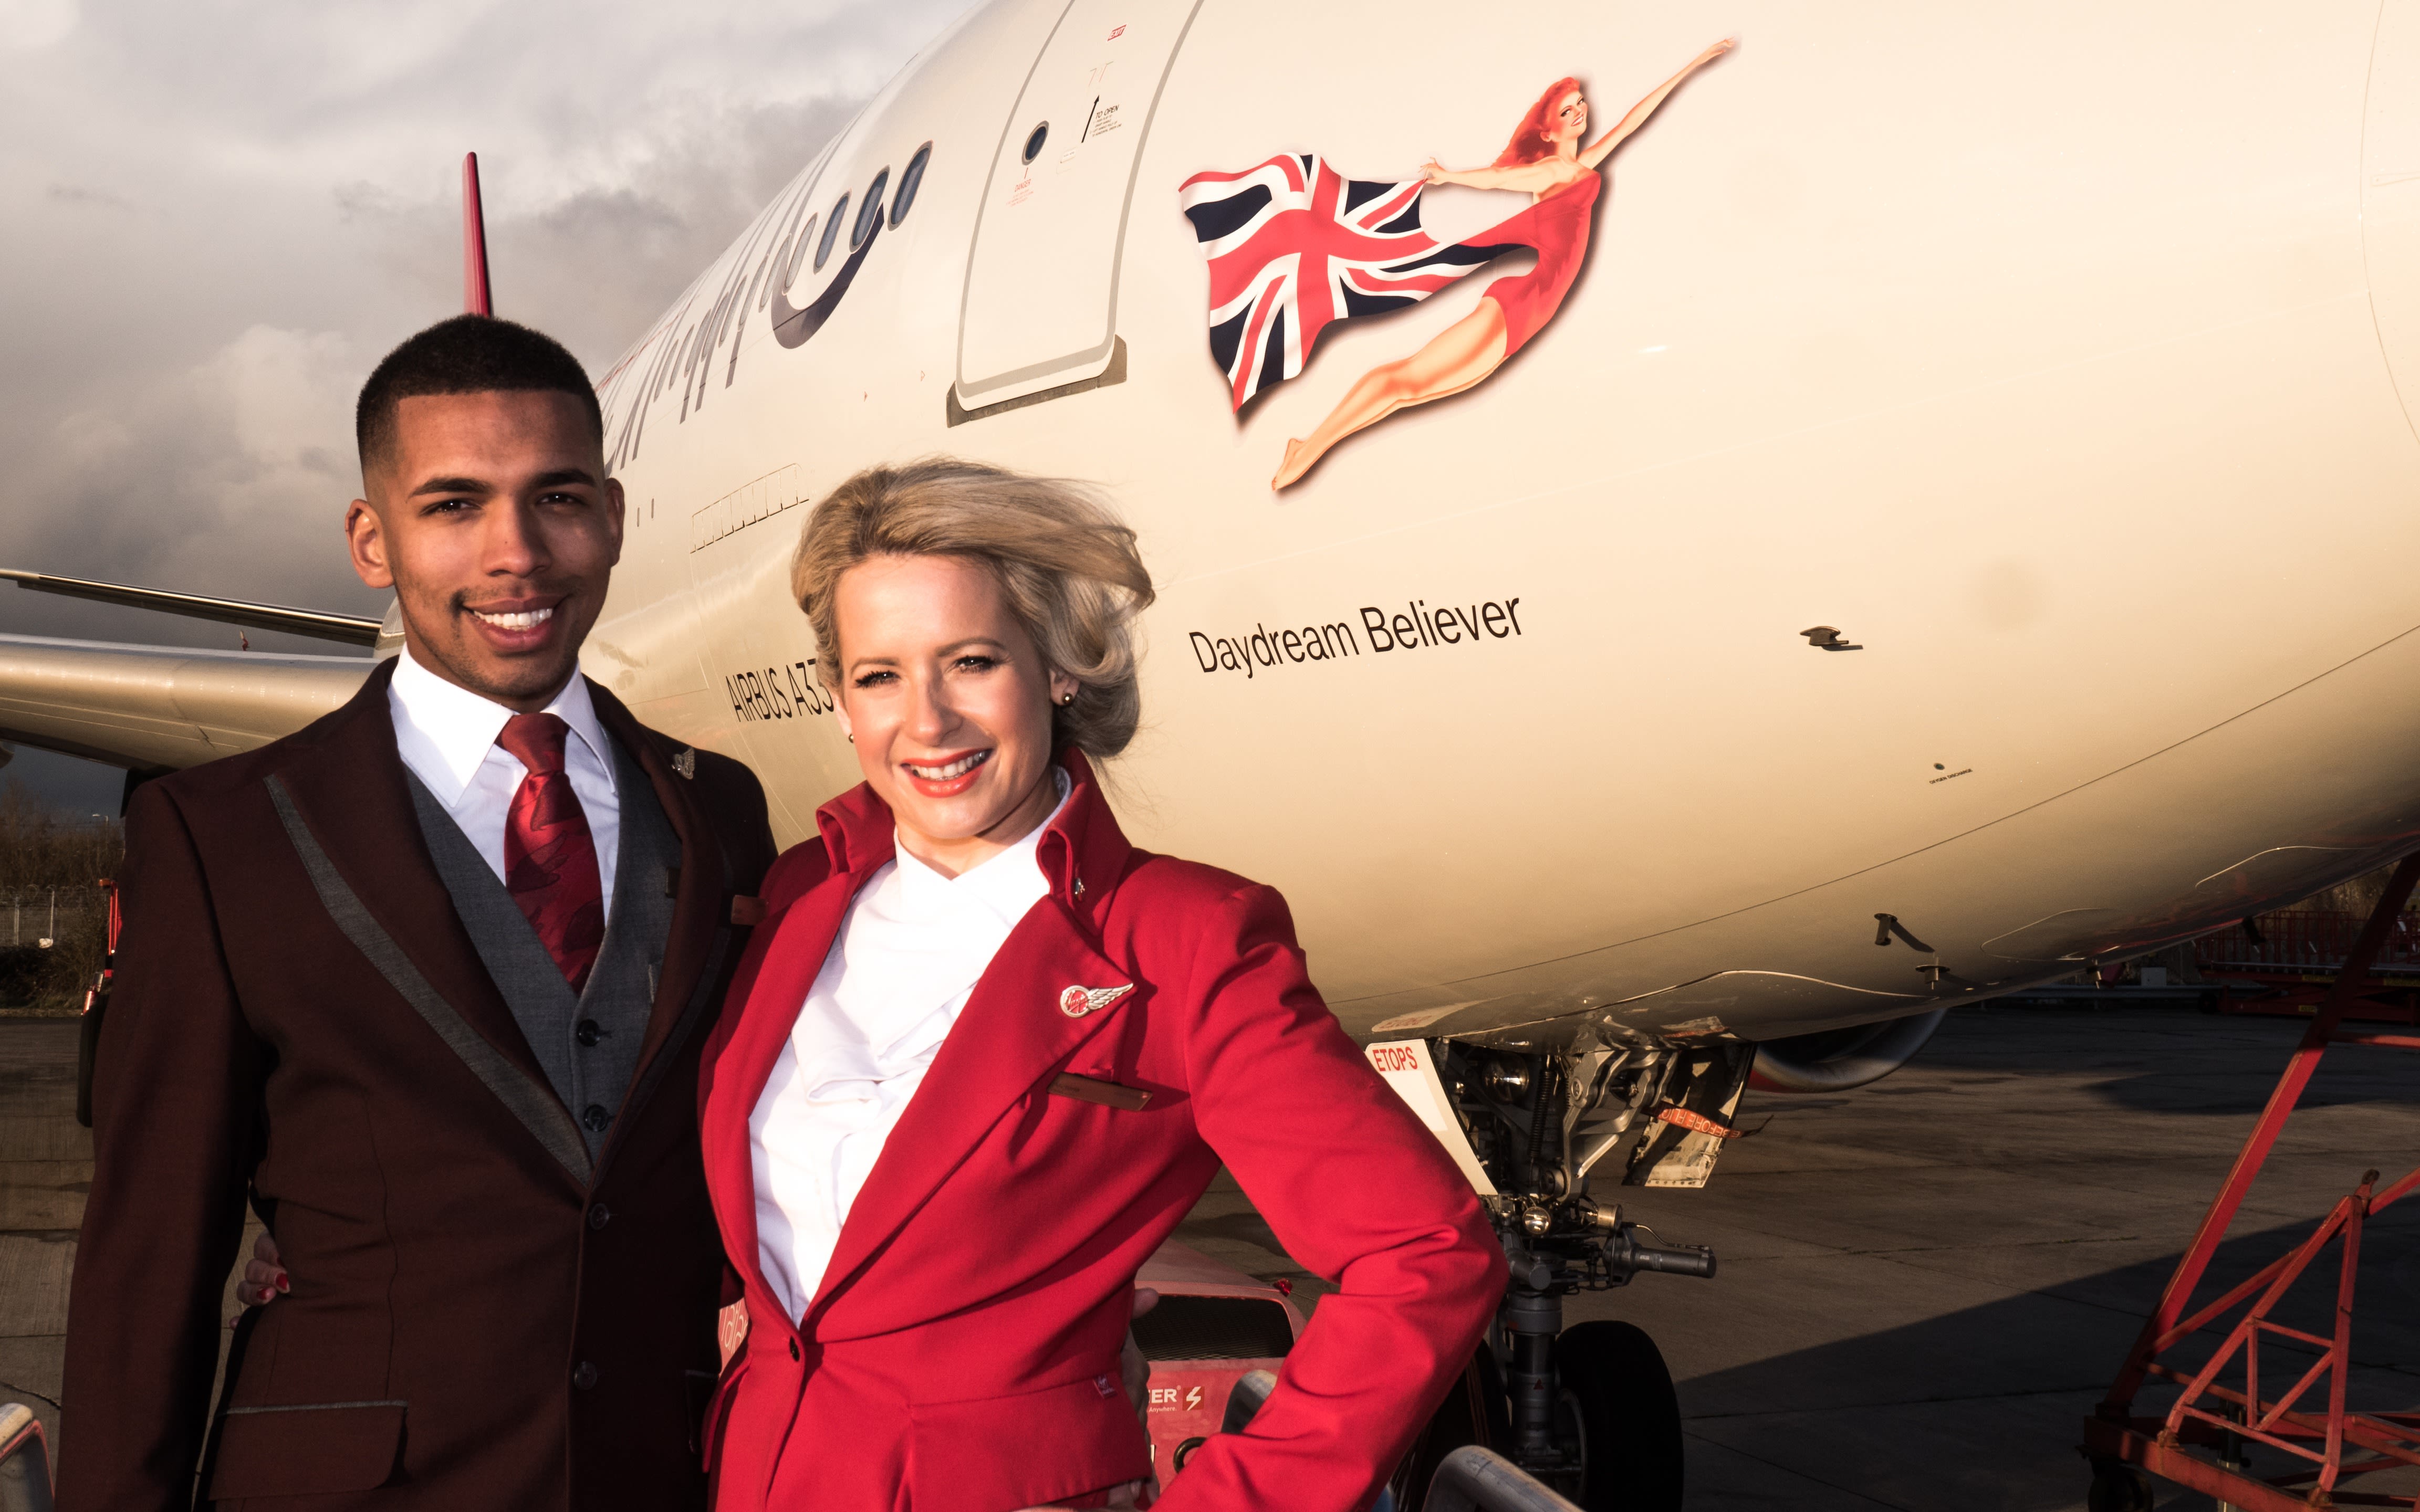 Two members of Virgin Atlantic cabin crew stand in front of Daydream Believer, an Airbus A330 aircraft